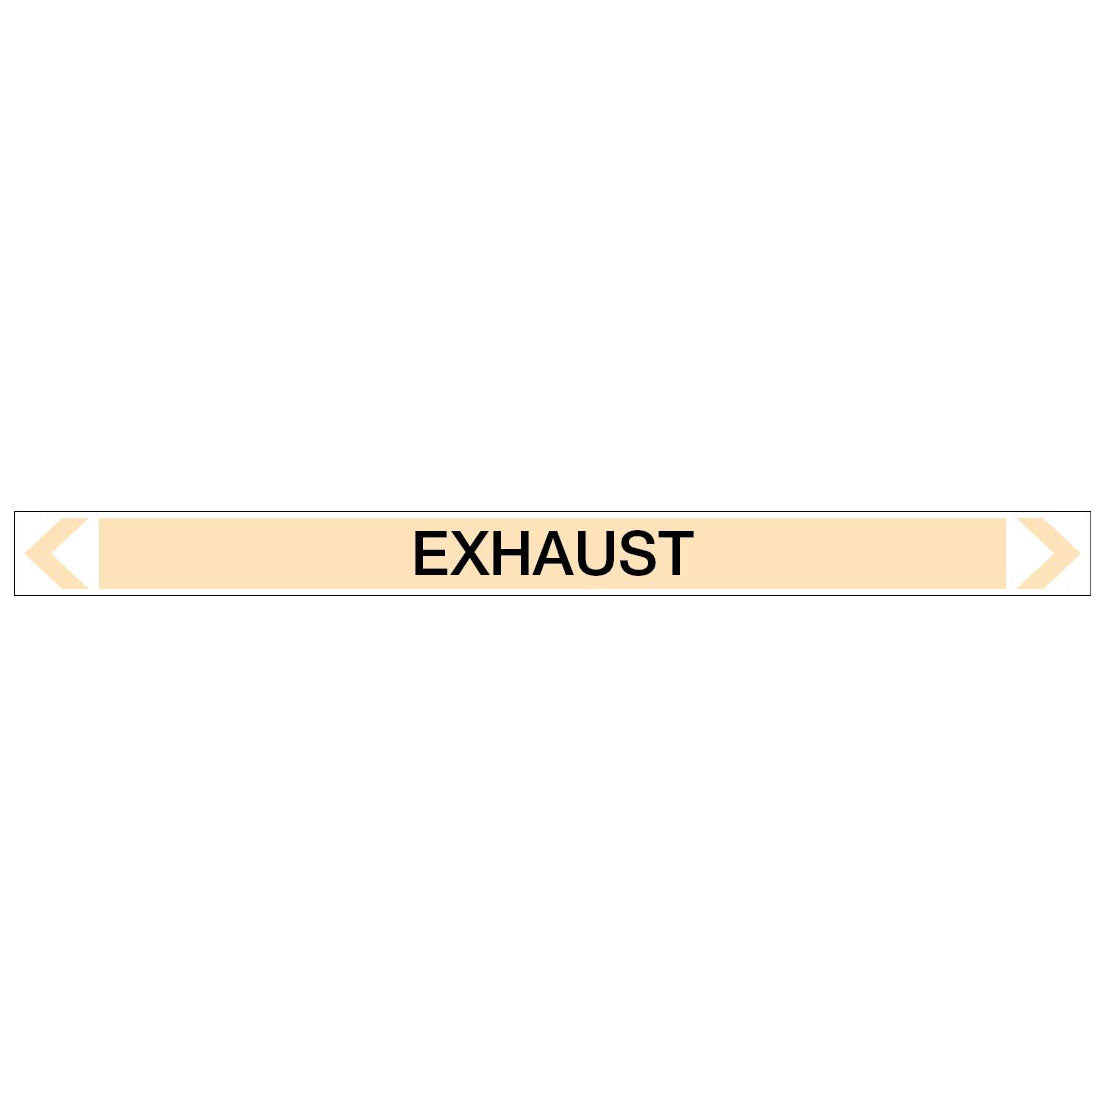 Gases - Exhaust - Pipe Marker Sticker